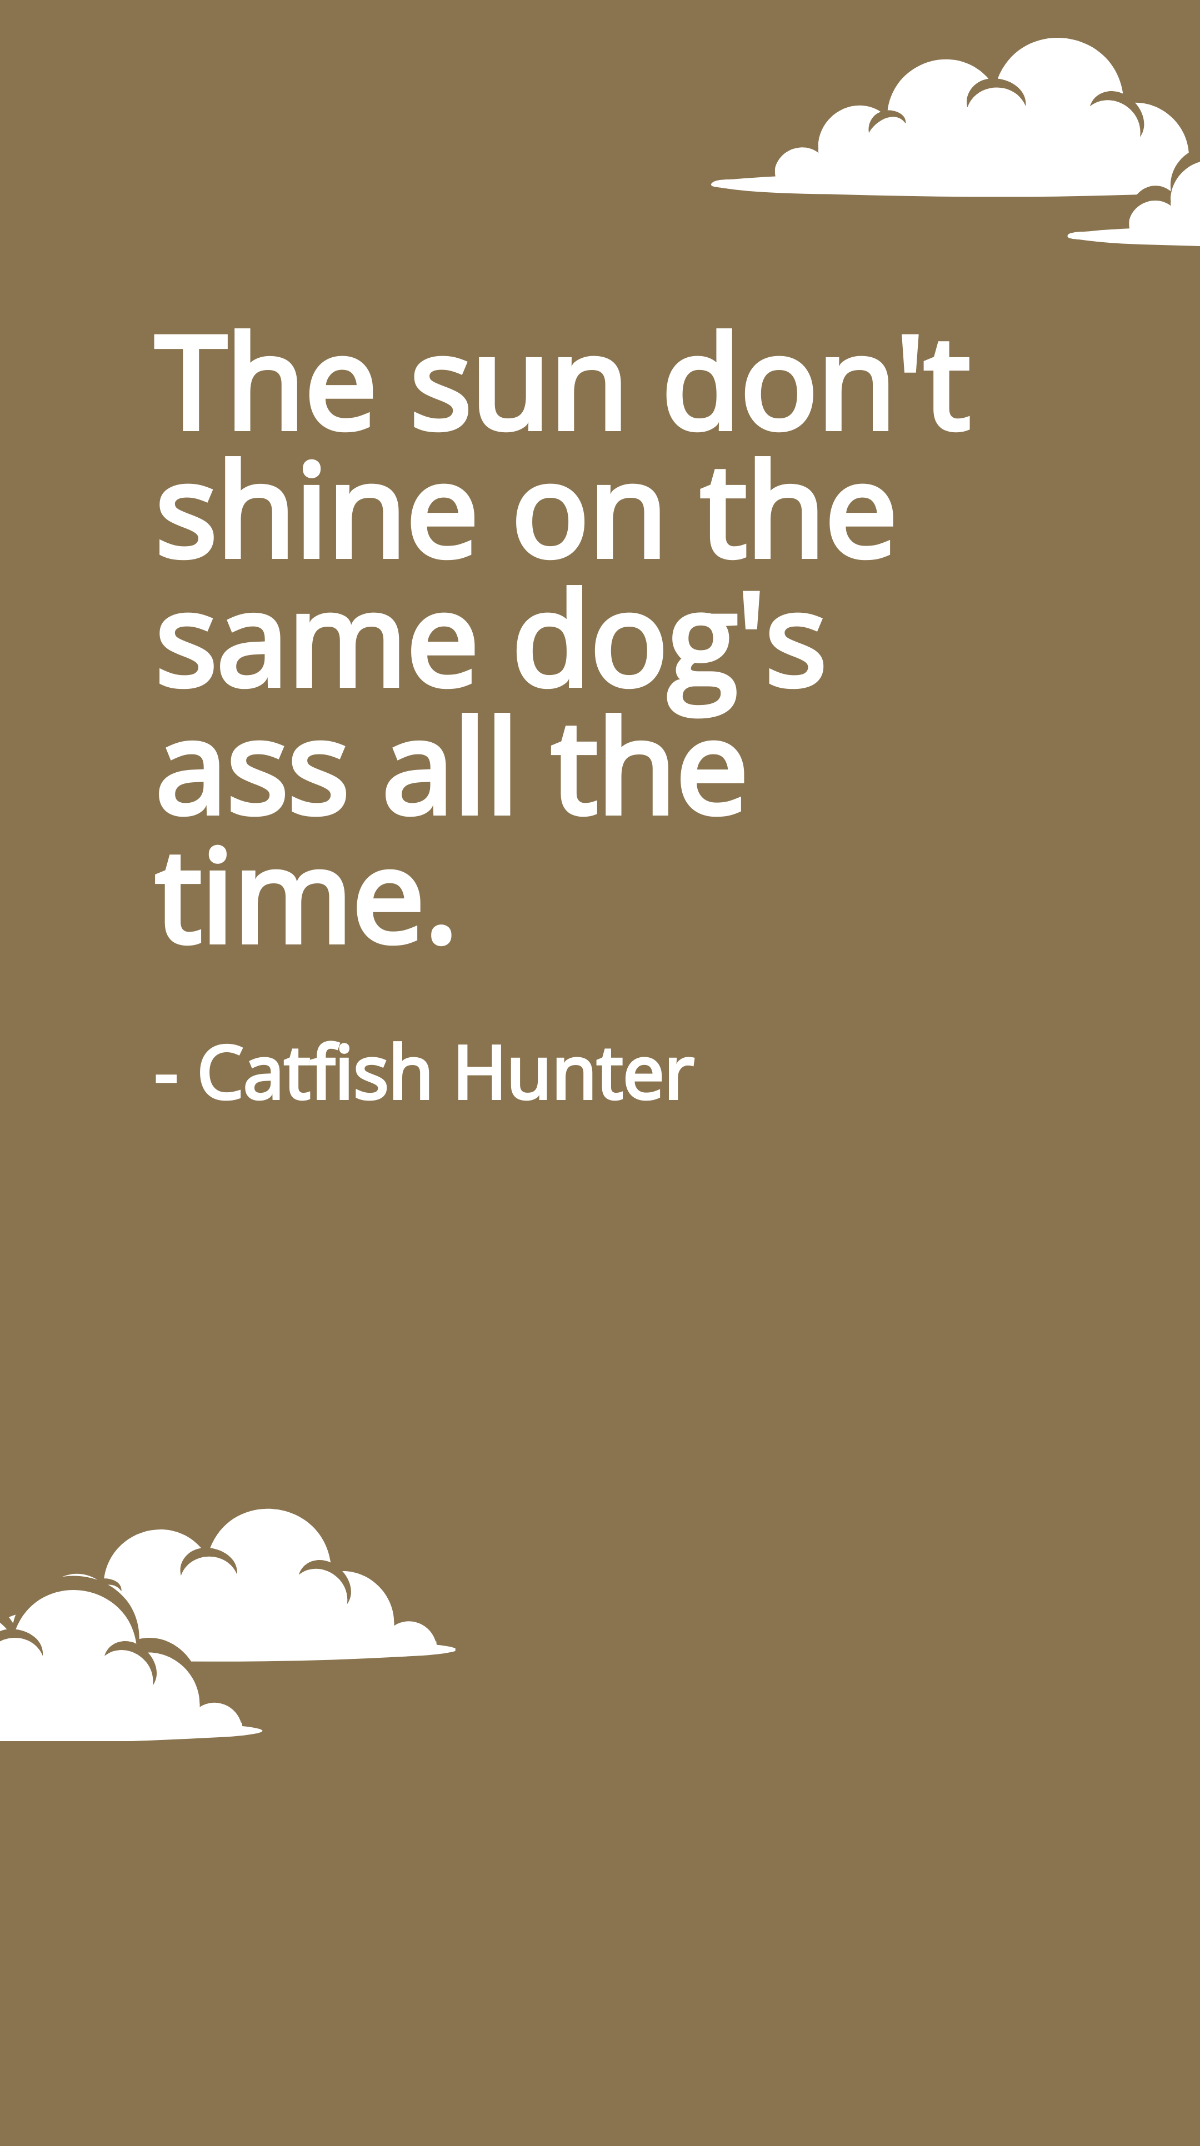 Free Catfish Hunter - The sun don't shine on the same dog's ass all the time. Template